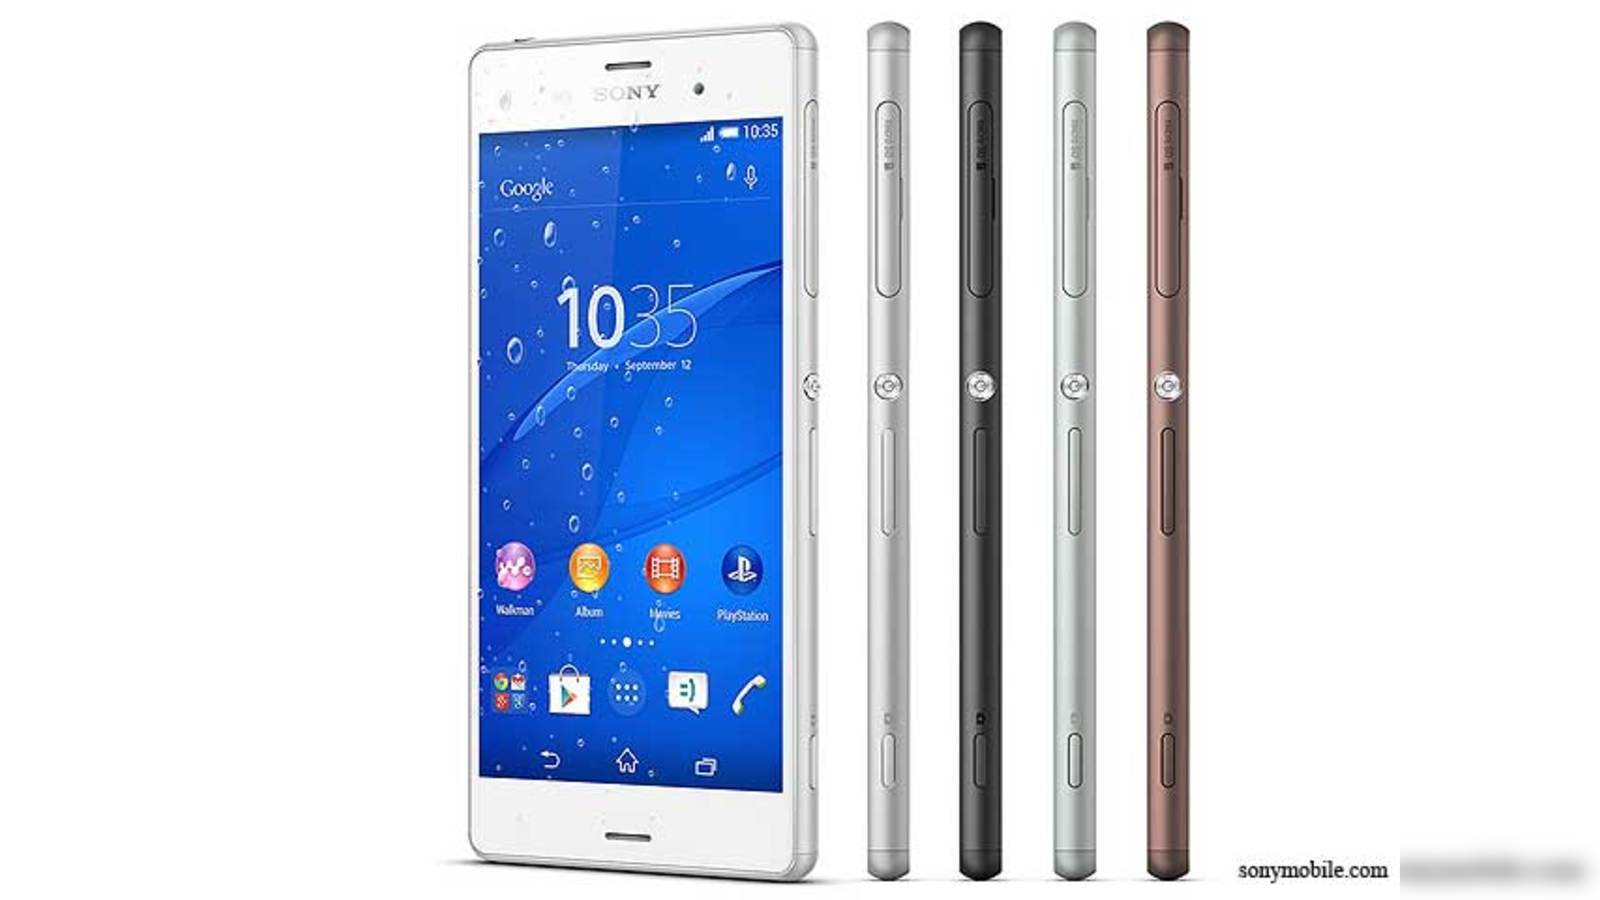 Sony Xperia Z3 review: Desirable smartphone, but price a let-down